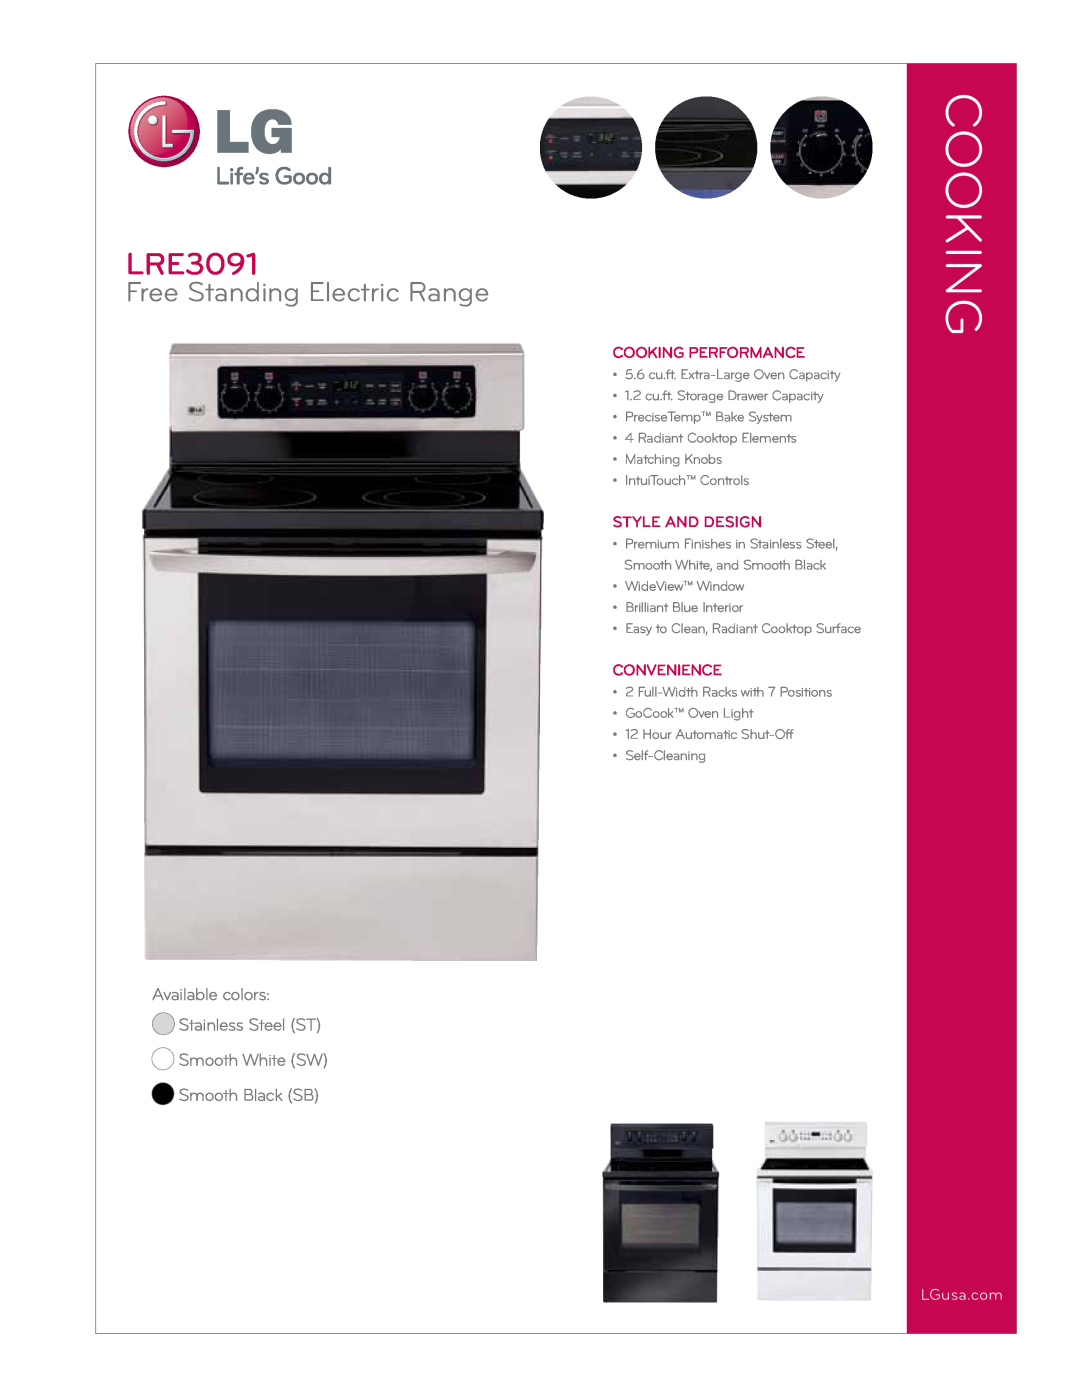 LG Electronics LRE3091 manual Free Standing Electric Range, Cooking Performance, StylE and Design, Convenience 